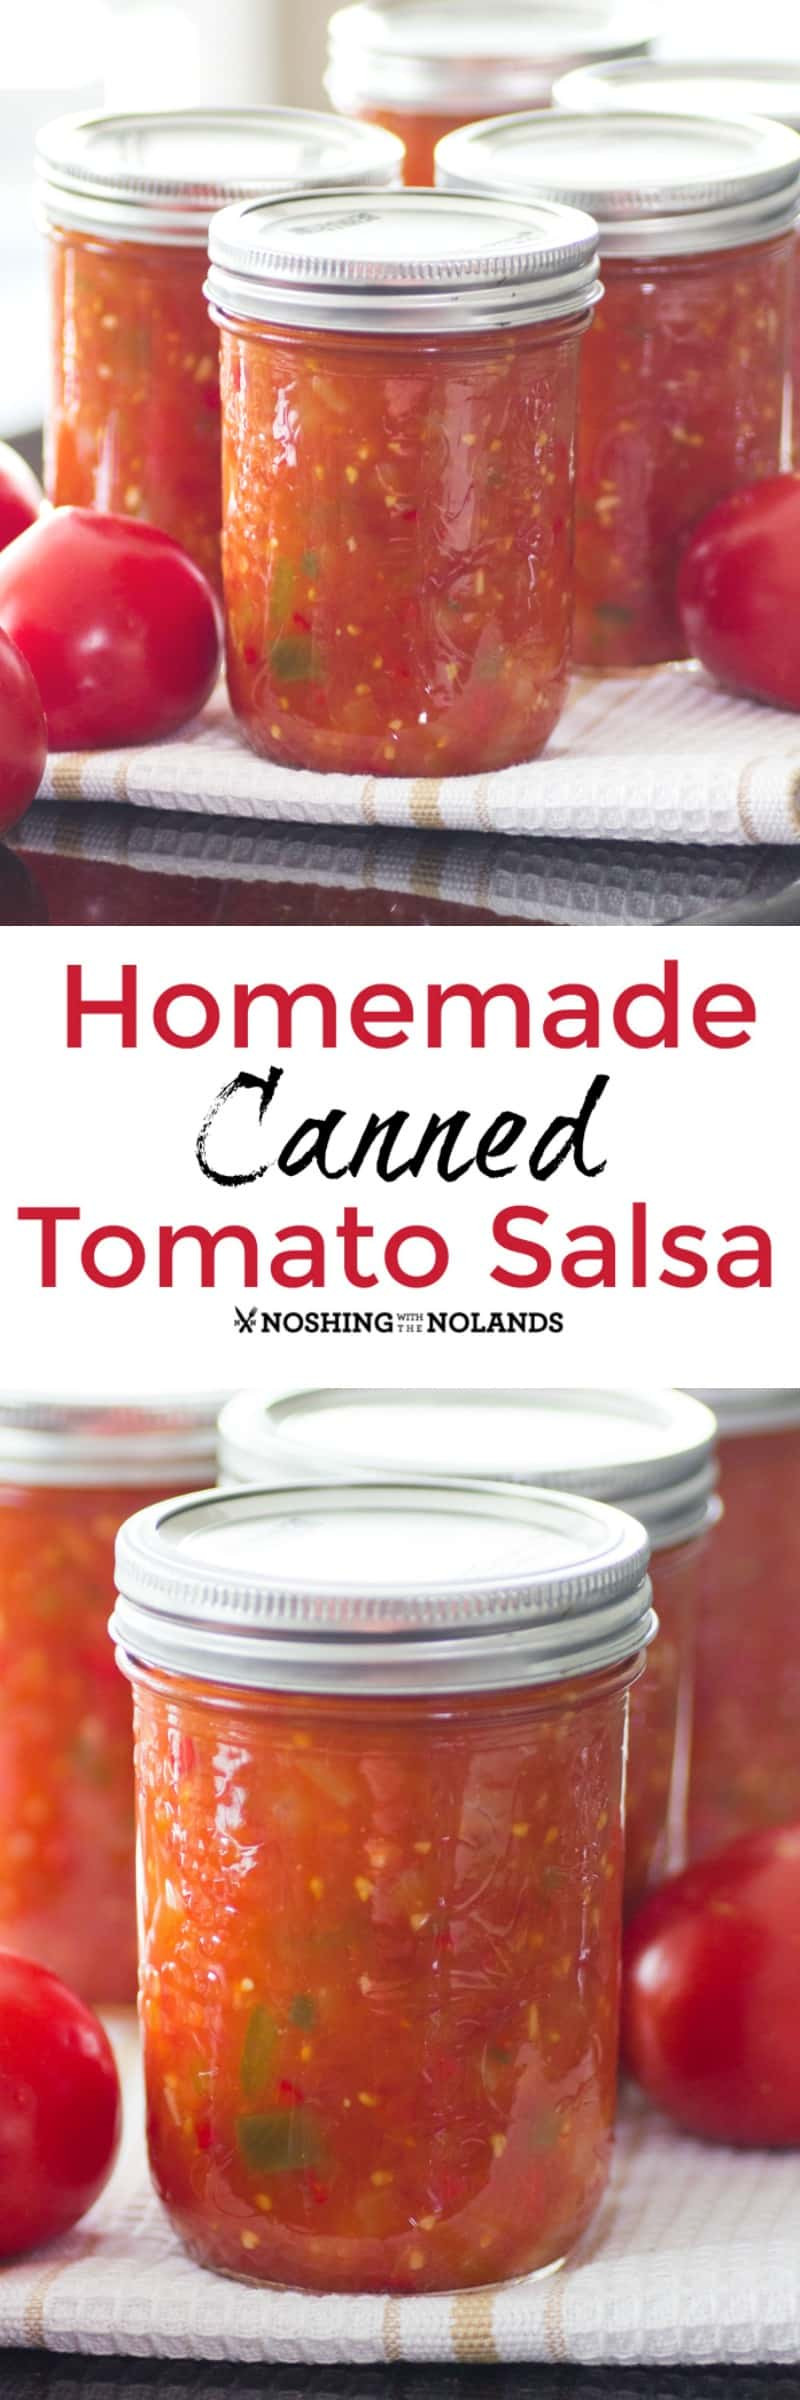 Tomato Salsa Recipe For Canning
 Homemade Canned Tomato Salsa is the best with fresh summer